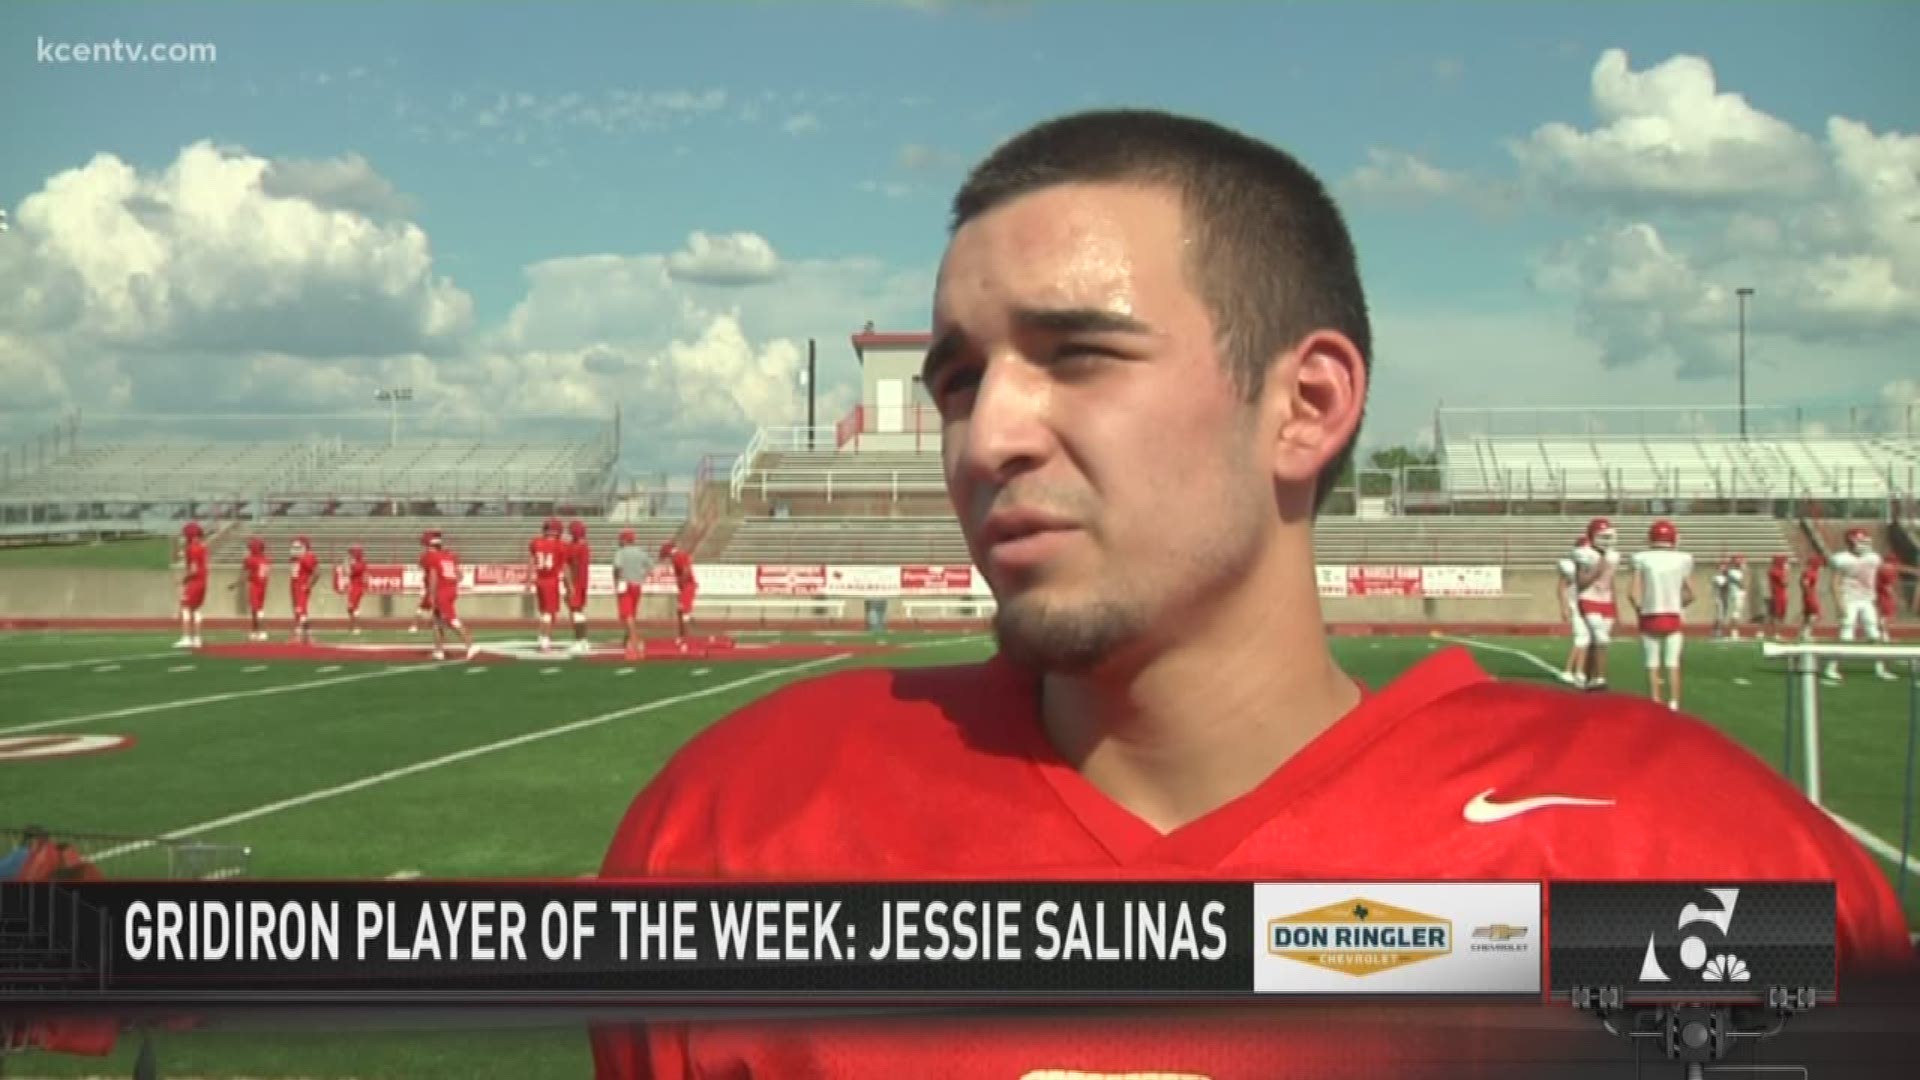 Groesbeck Goat fans got to see a dominant performance from one of their own-- Jessie Salinas, a sophomore outside linebacker.